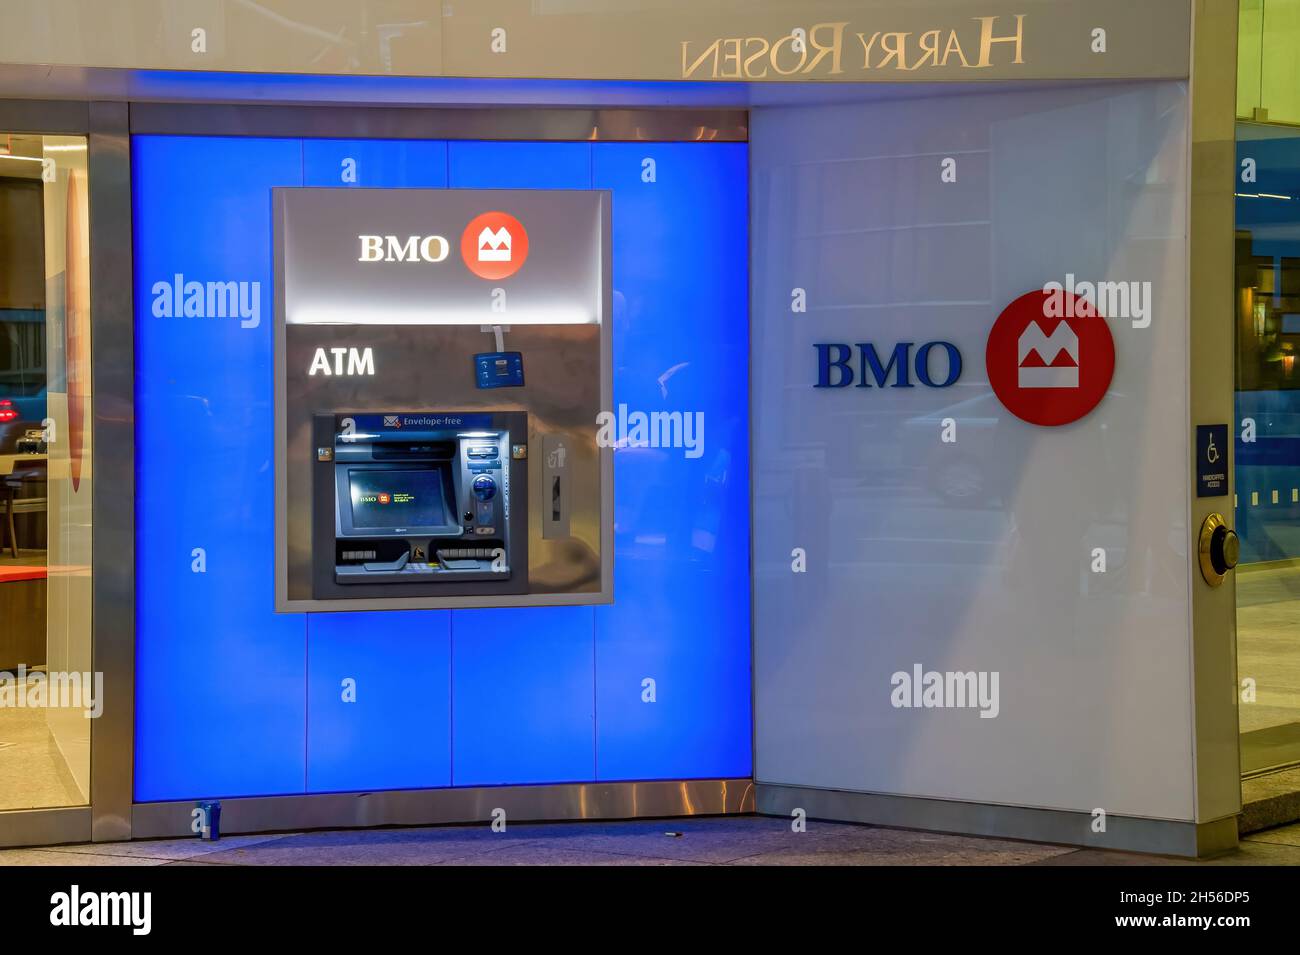 Automatic teller machine branded Bank of Montreal or BMO